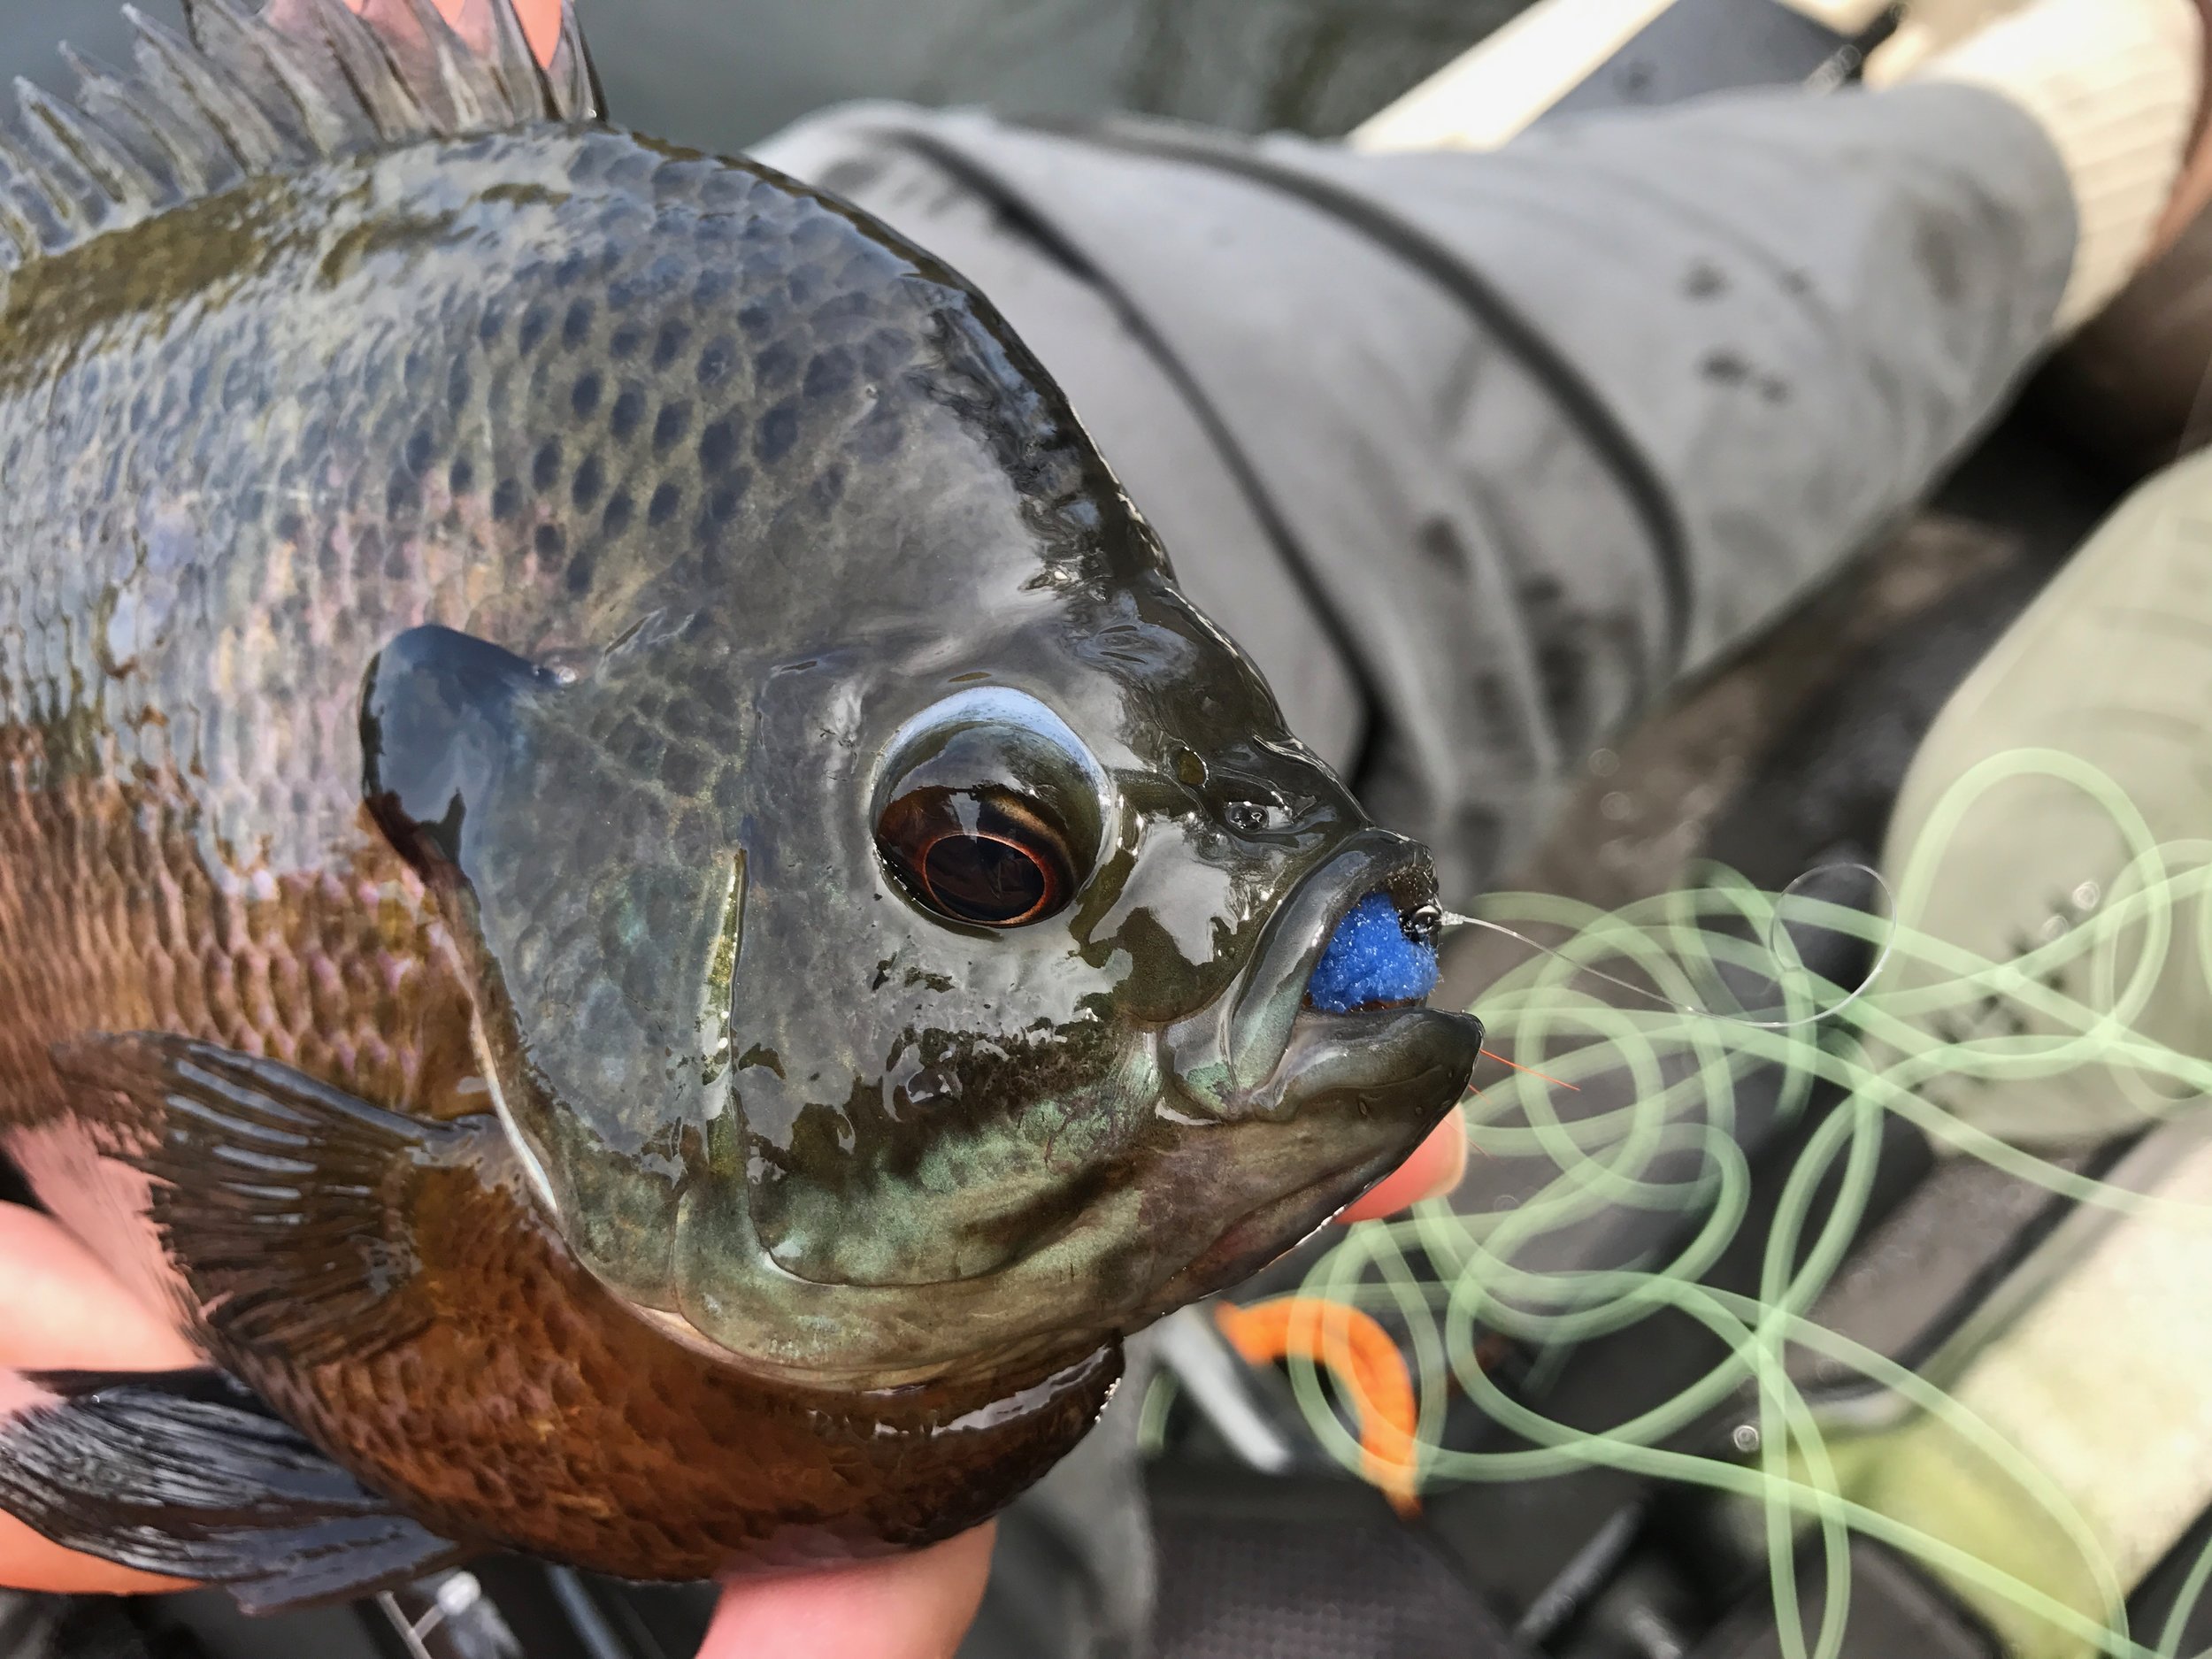 Fish the Pre-spawn Season for Big Bluegills — Panfish On The Fly